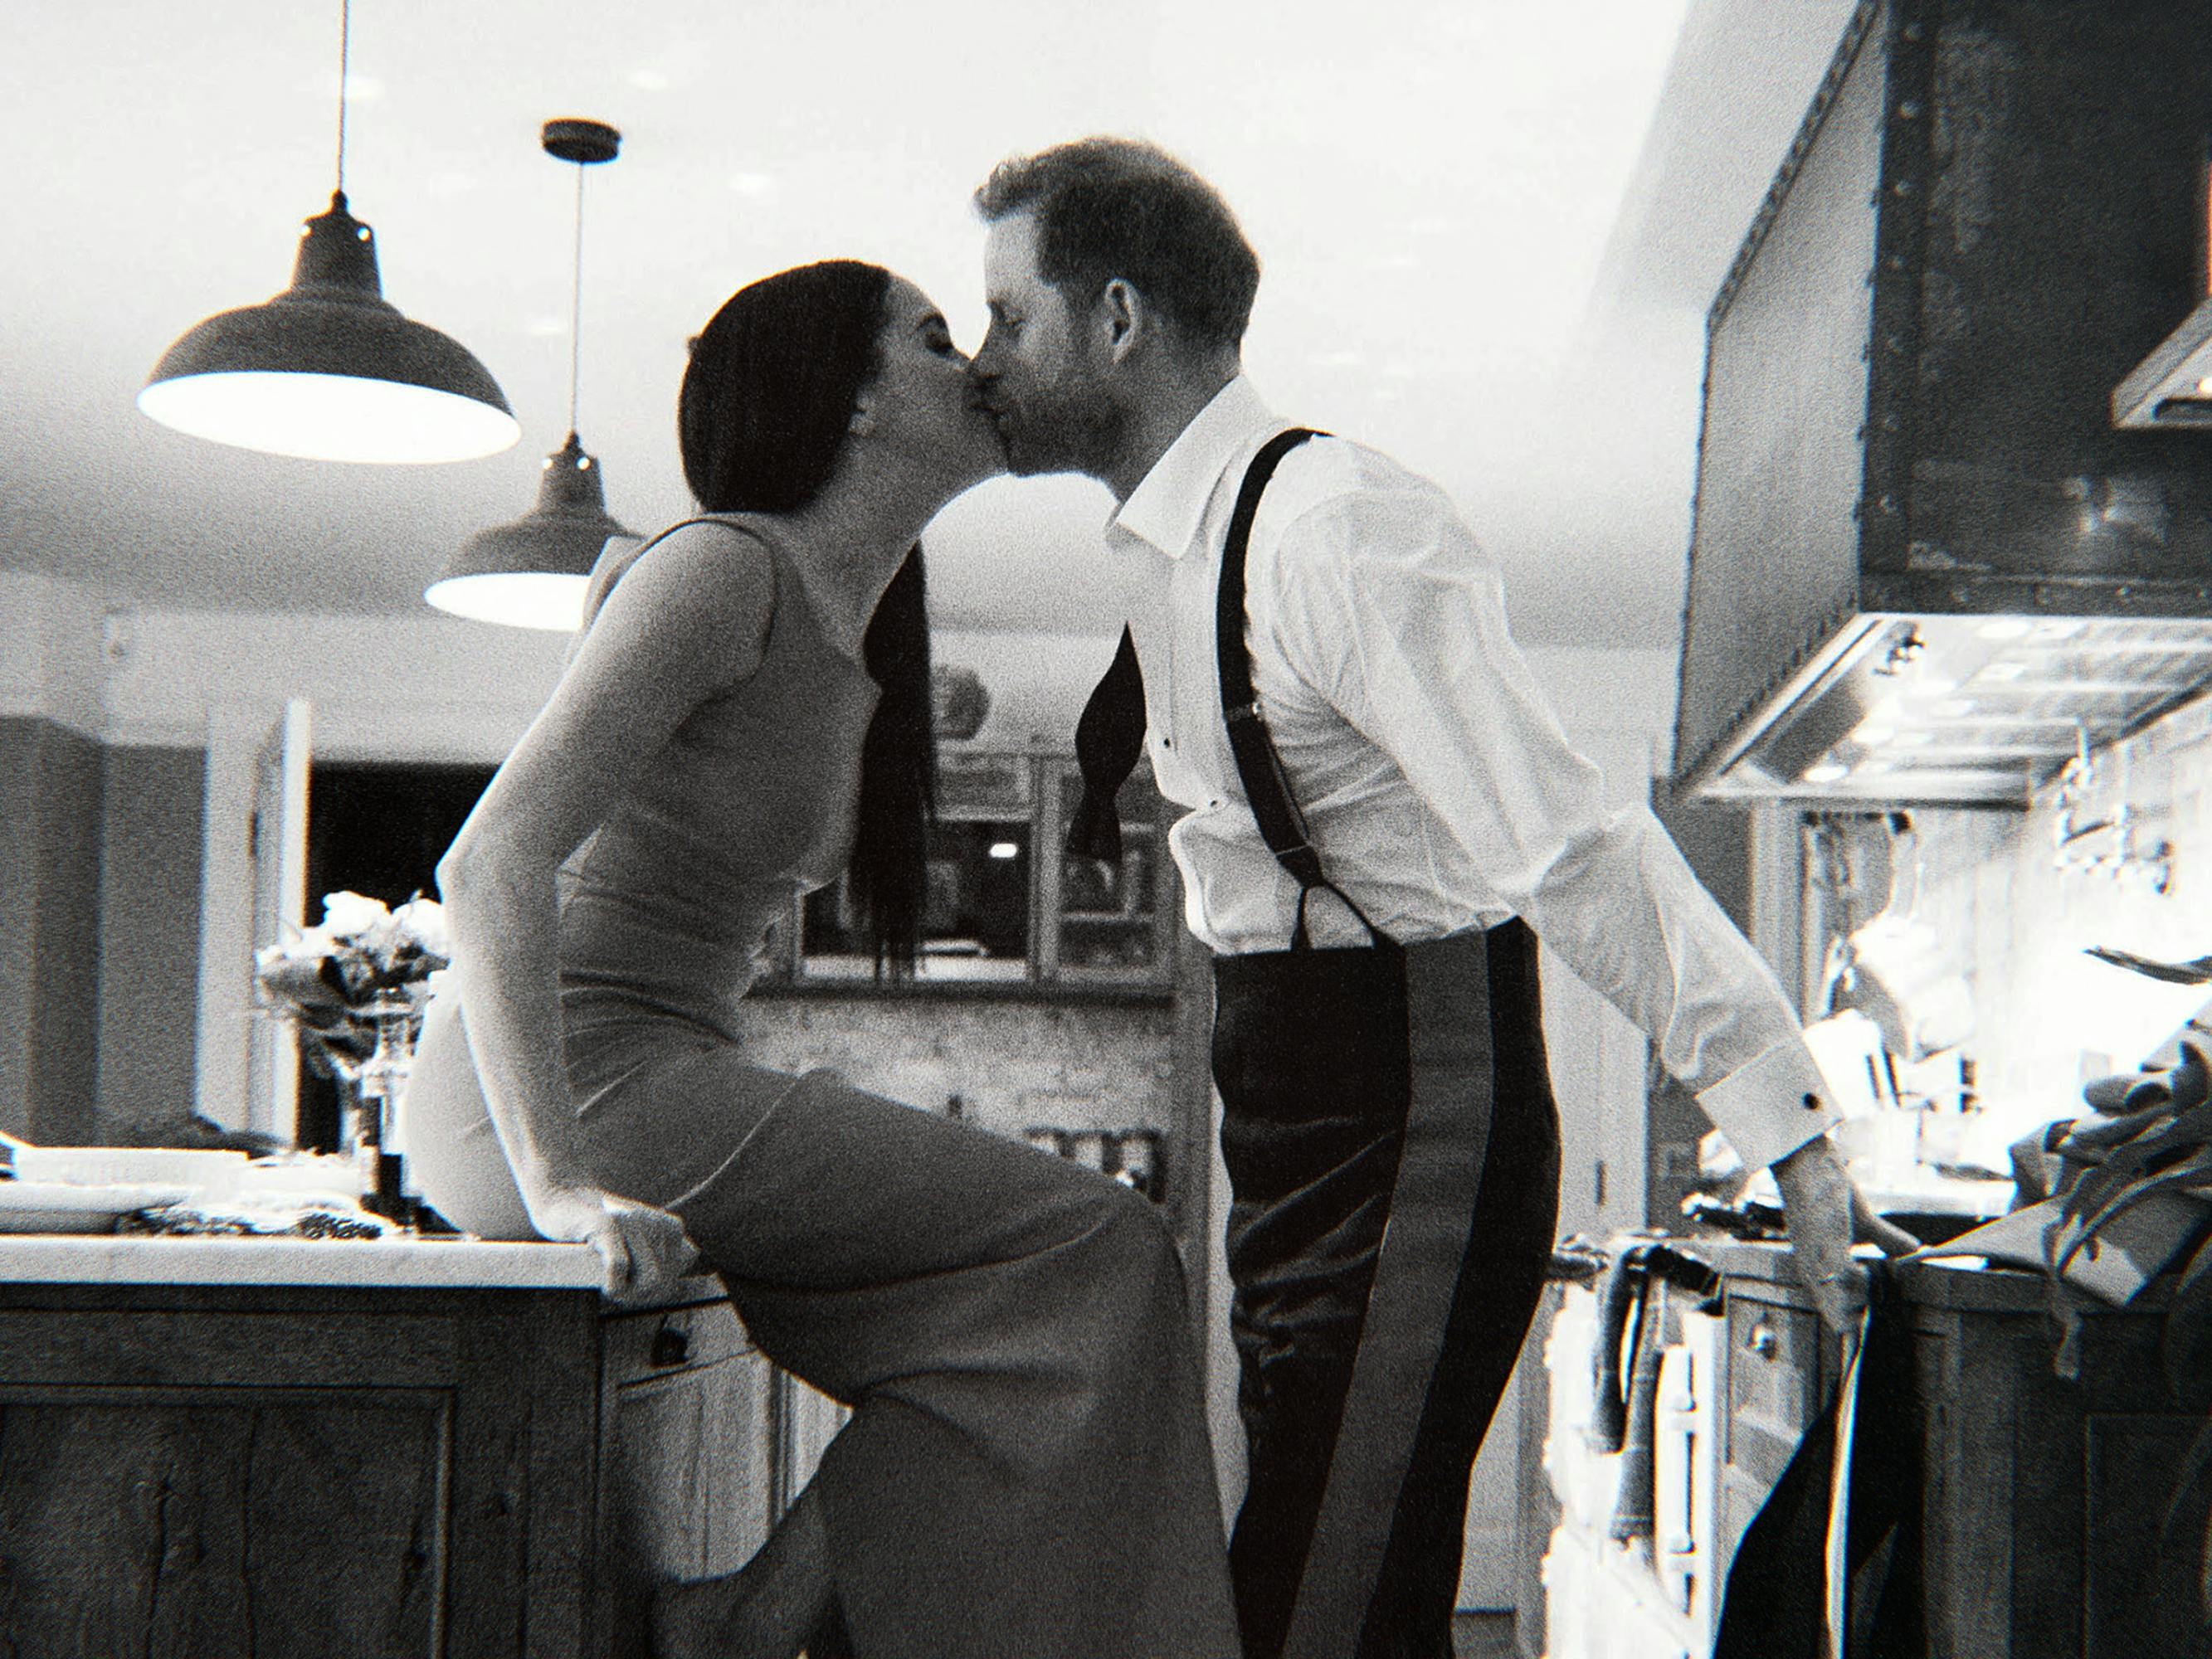 Meghan and Harry kiss in this black and white shot. Meghan sits on the counter and Harry wears suspenders.